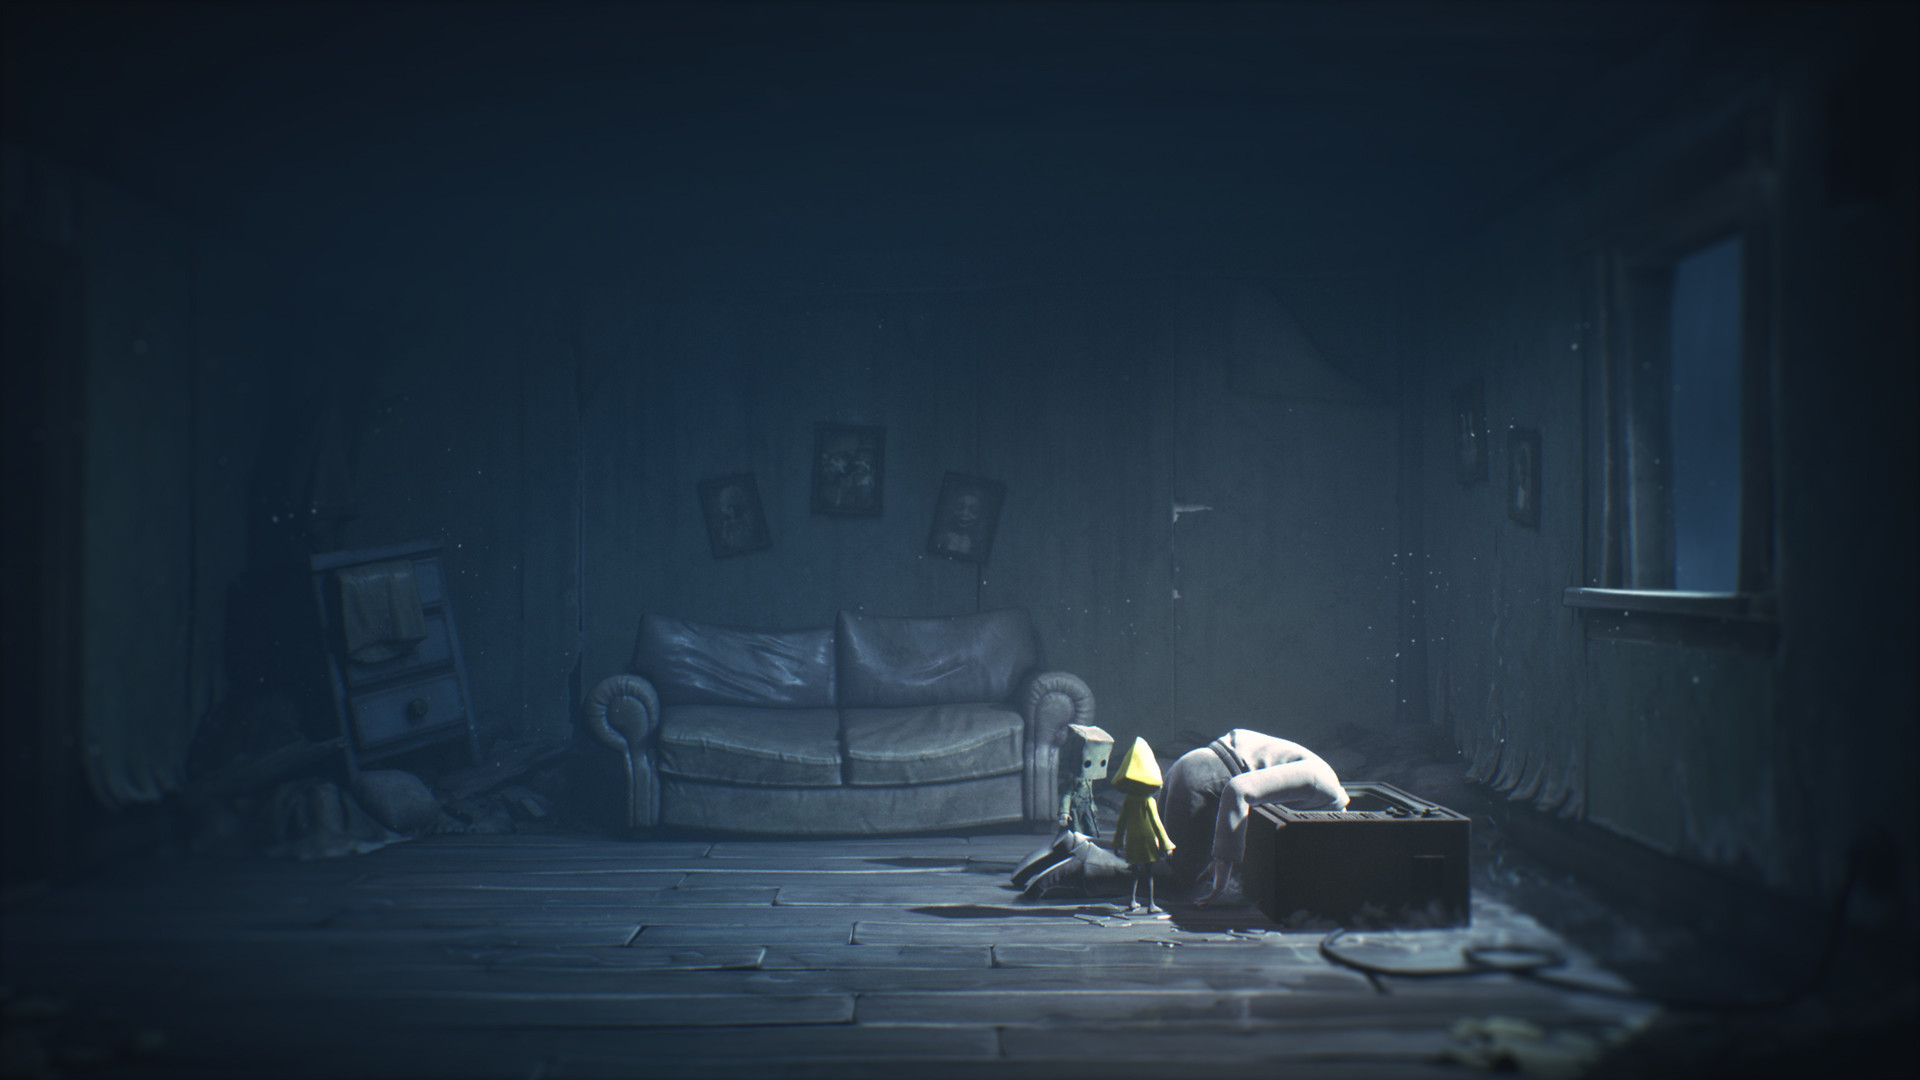 Little Nightmares 2 DLC Release Date, Characters for 2021 : When is it  coming out ? - DigiStatement